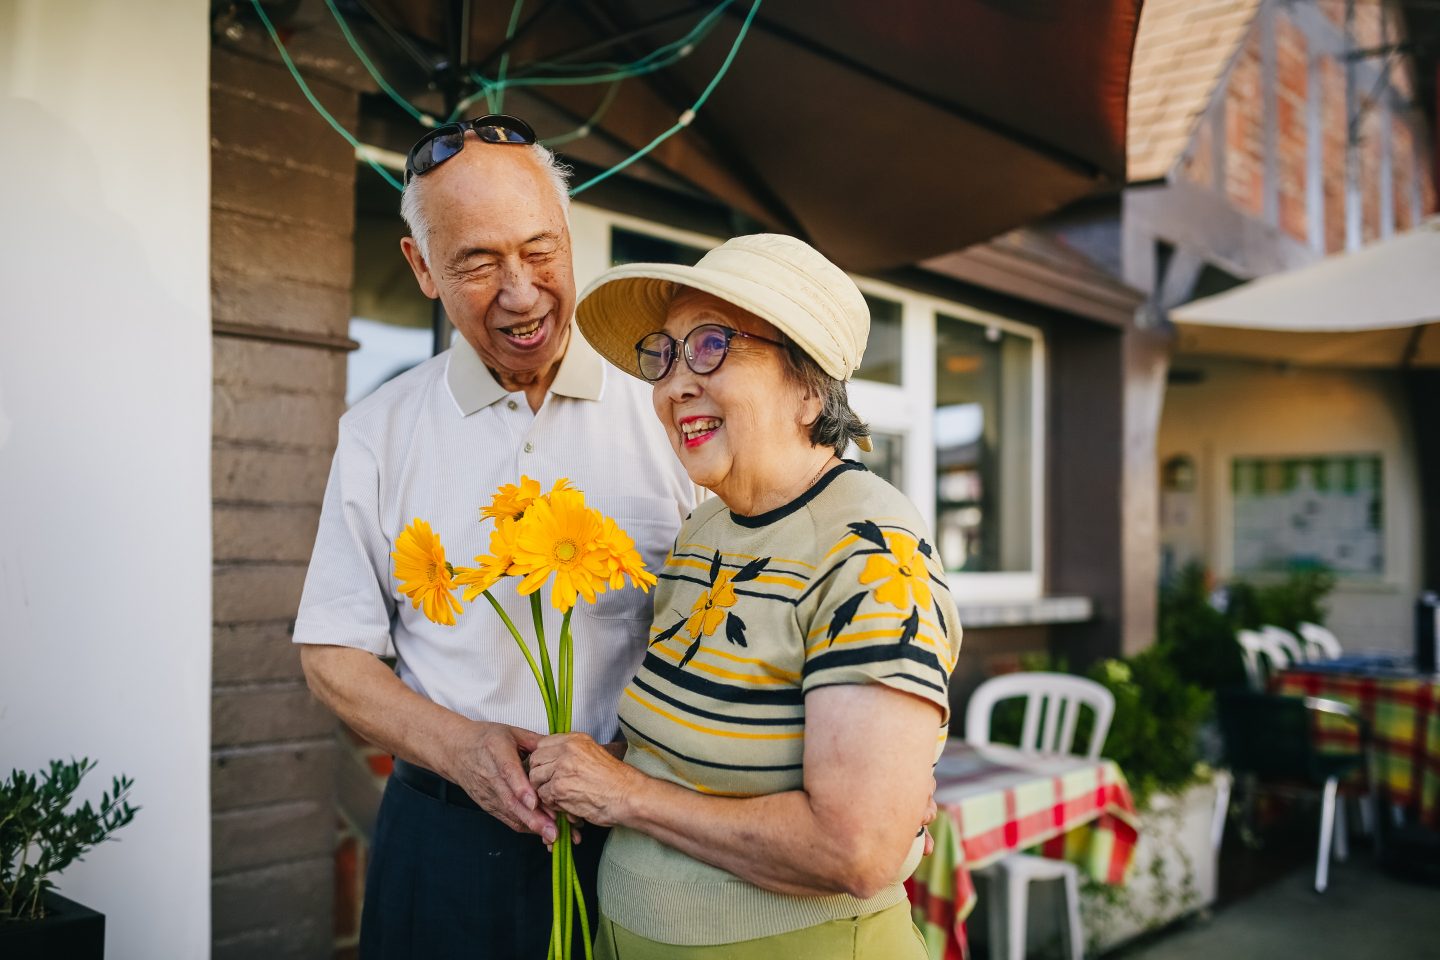 elderly feature - Photo by RODNAE Productions from Pexels